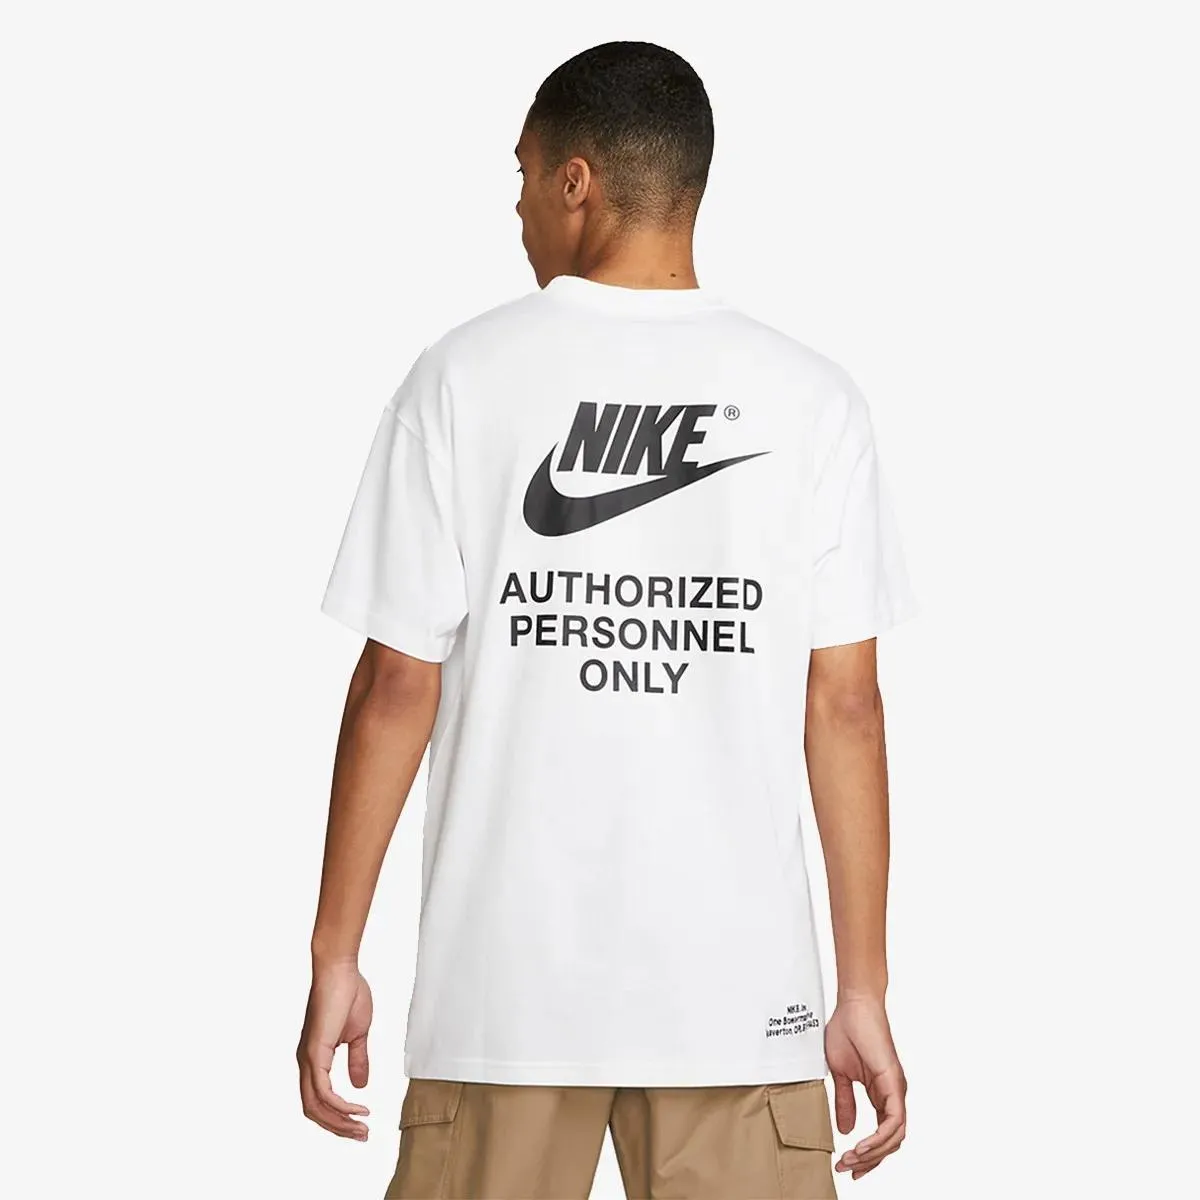 Nike T-shirt Authorized Personnel 